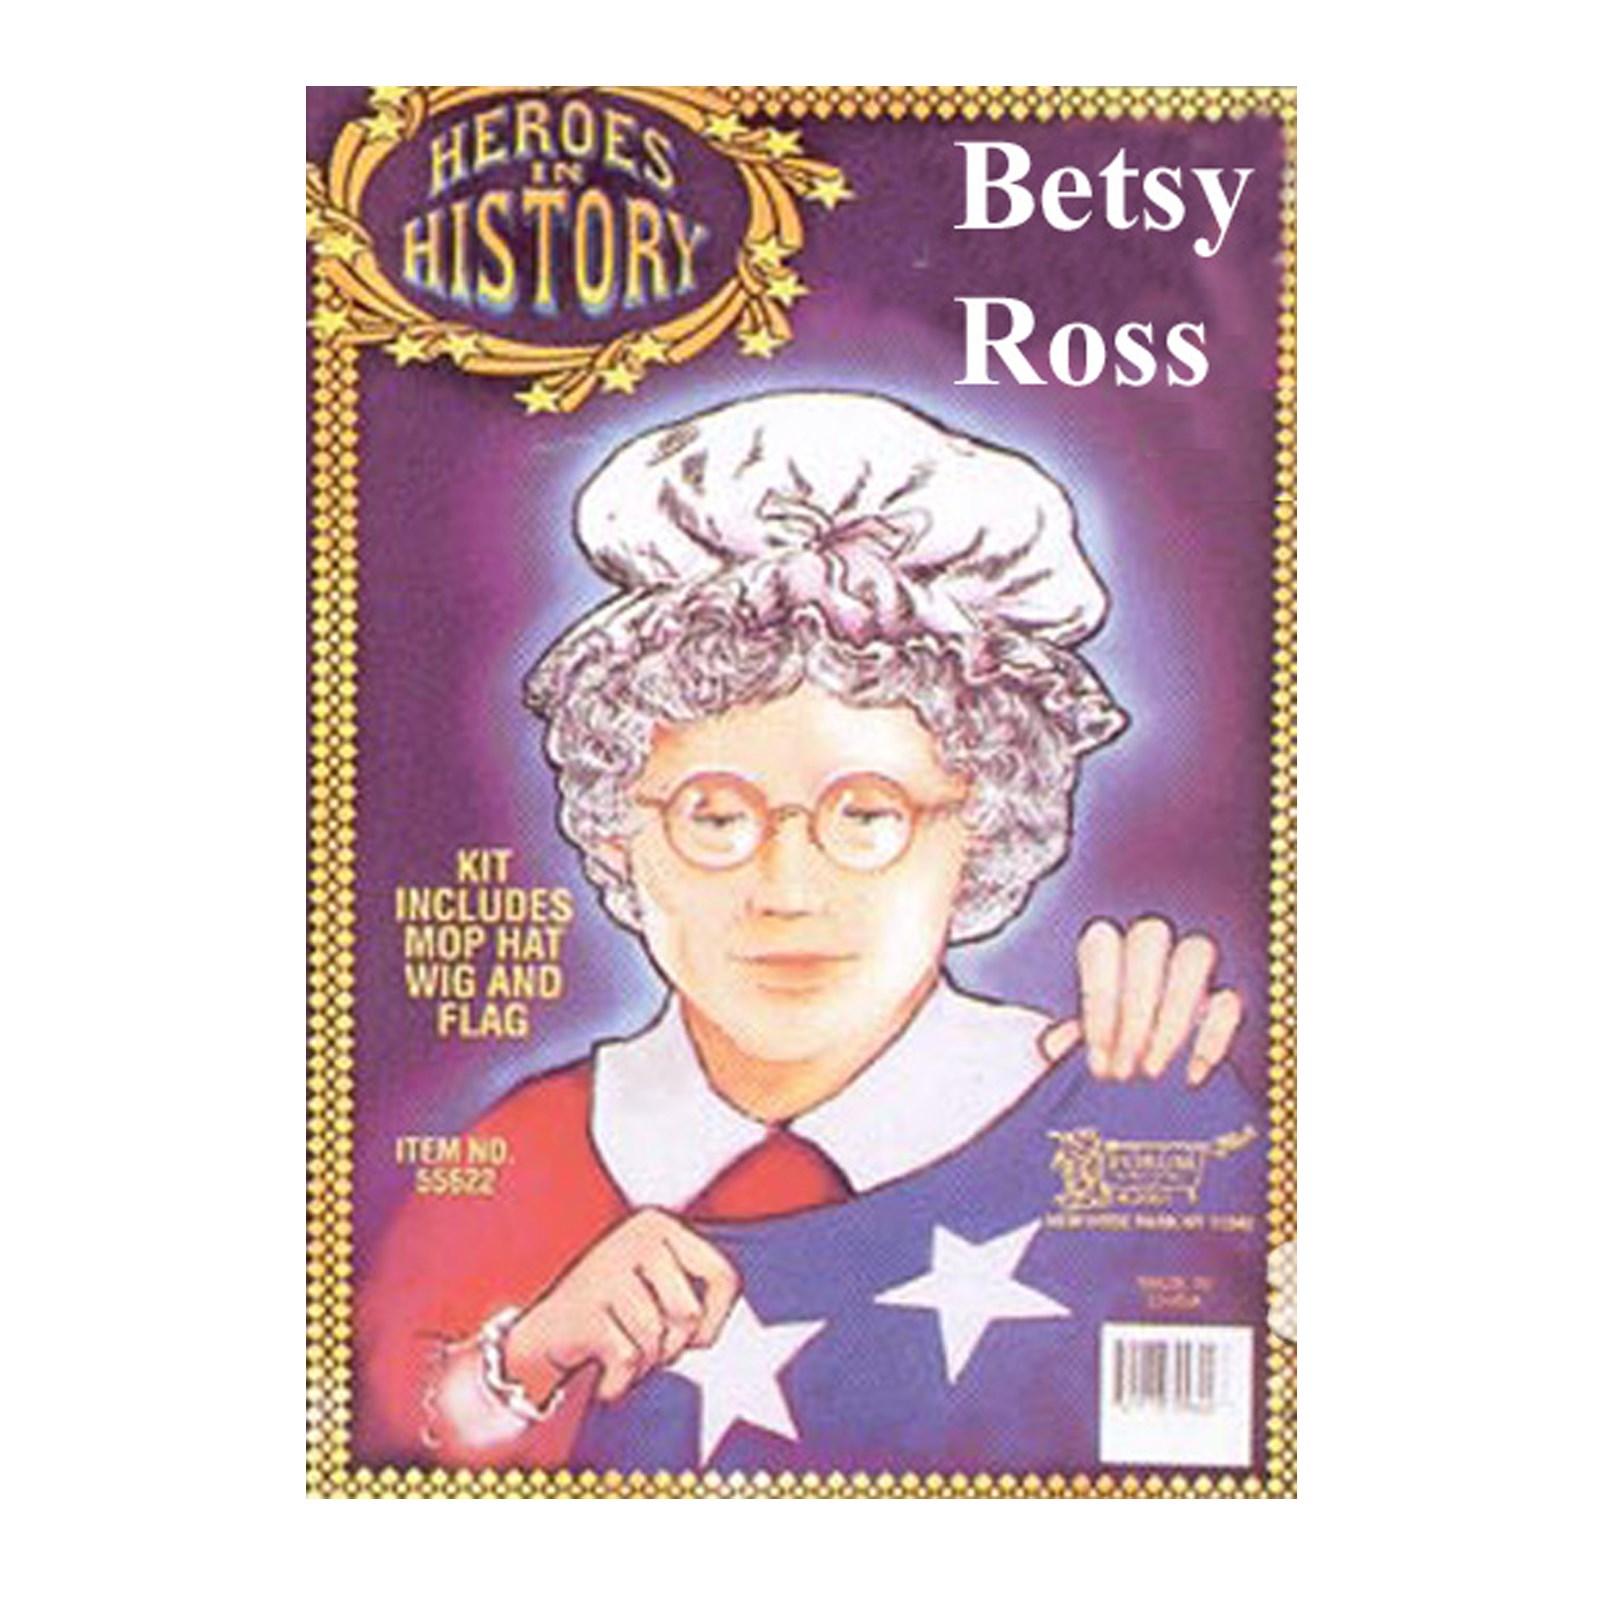 Heroes in History - Betsy Ross Accessory Kit